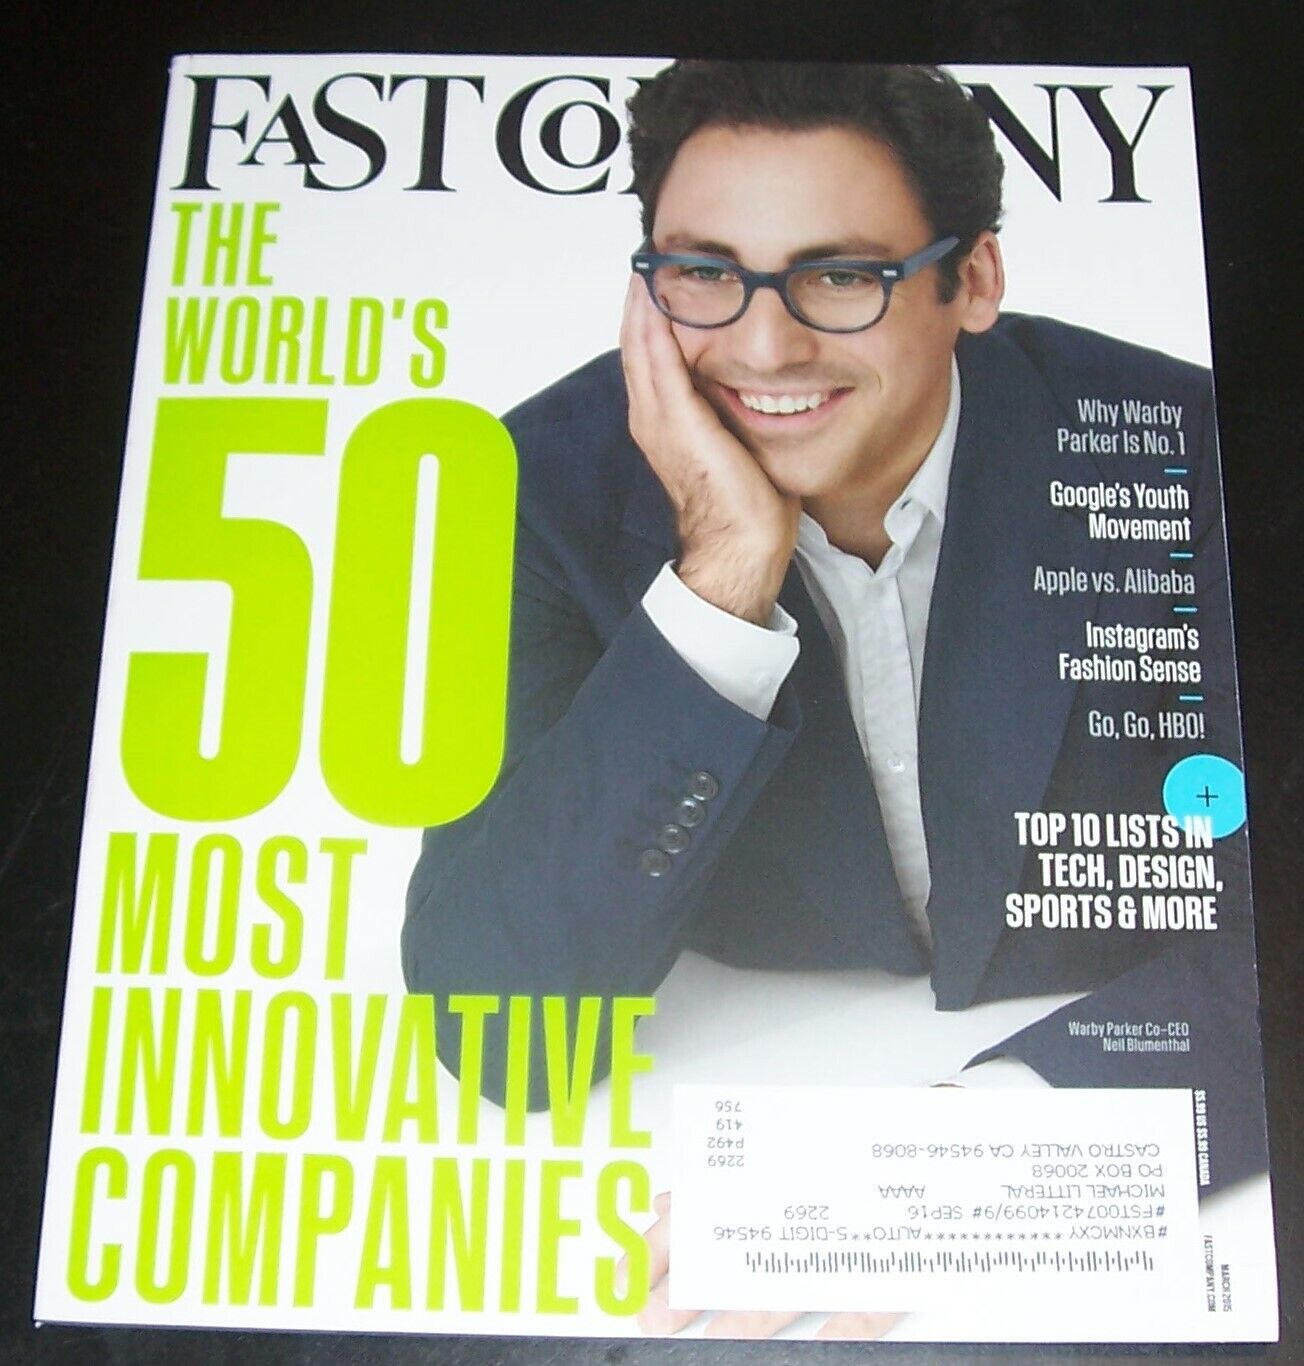 50 Most InnovativeCompanies, Top 10 Lists, HBO, FAST COMPANY Mar 2015, Comb Shpg